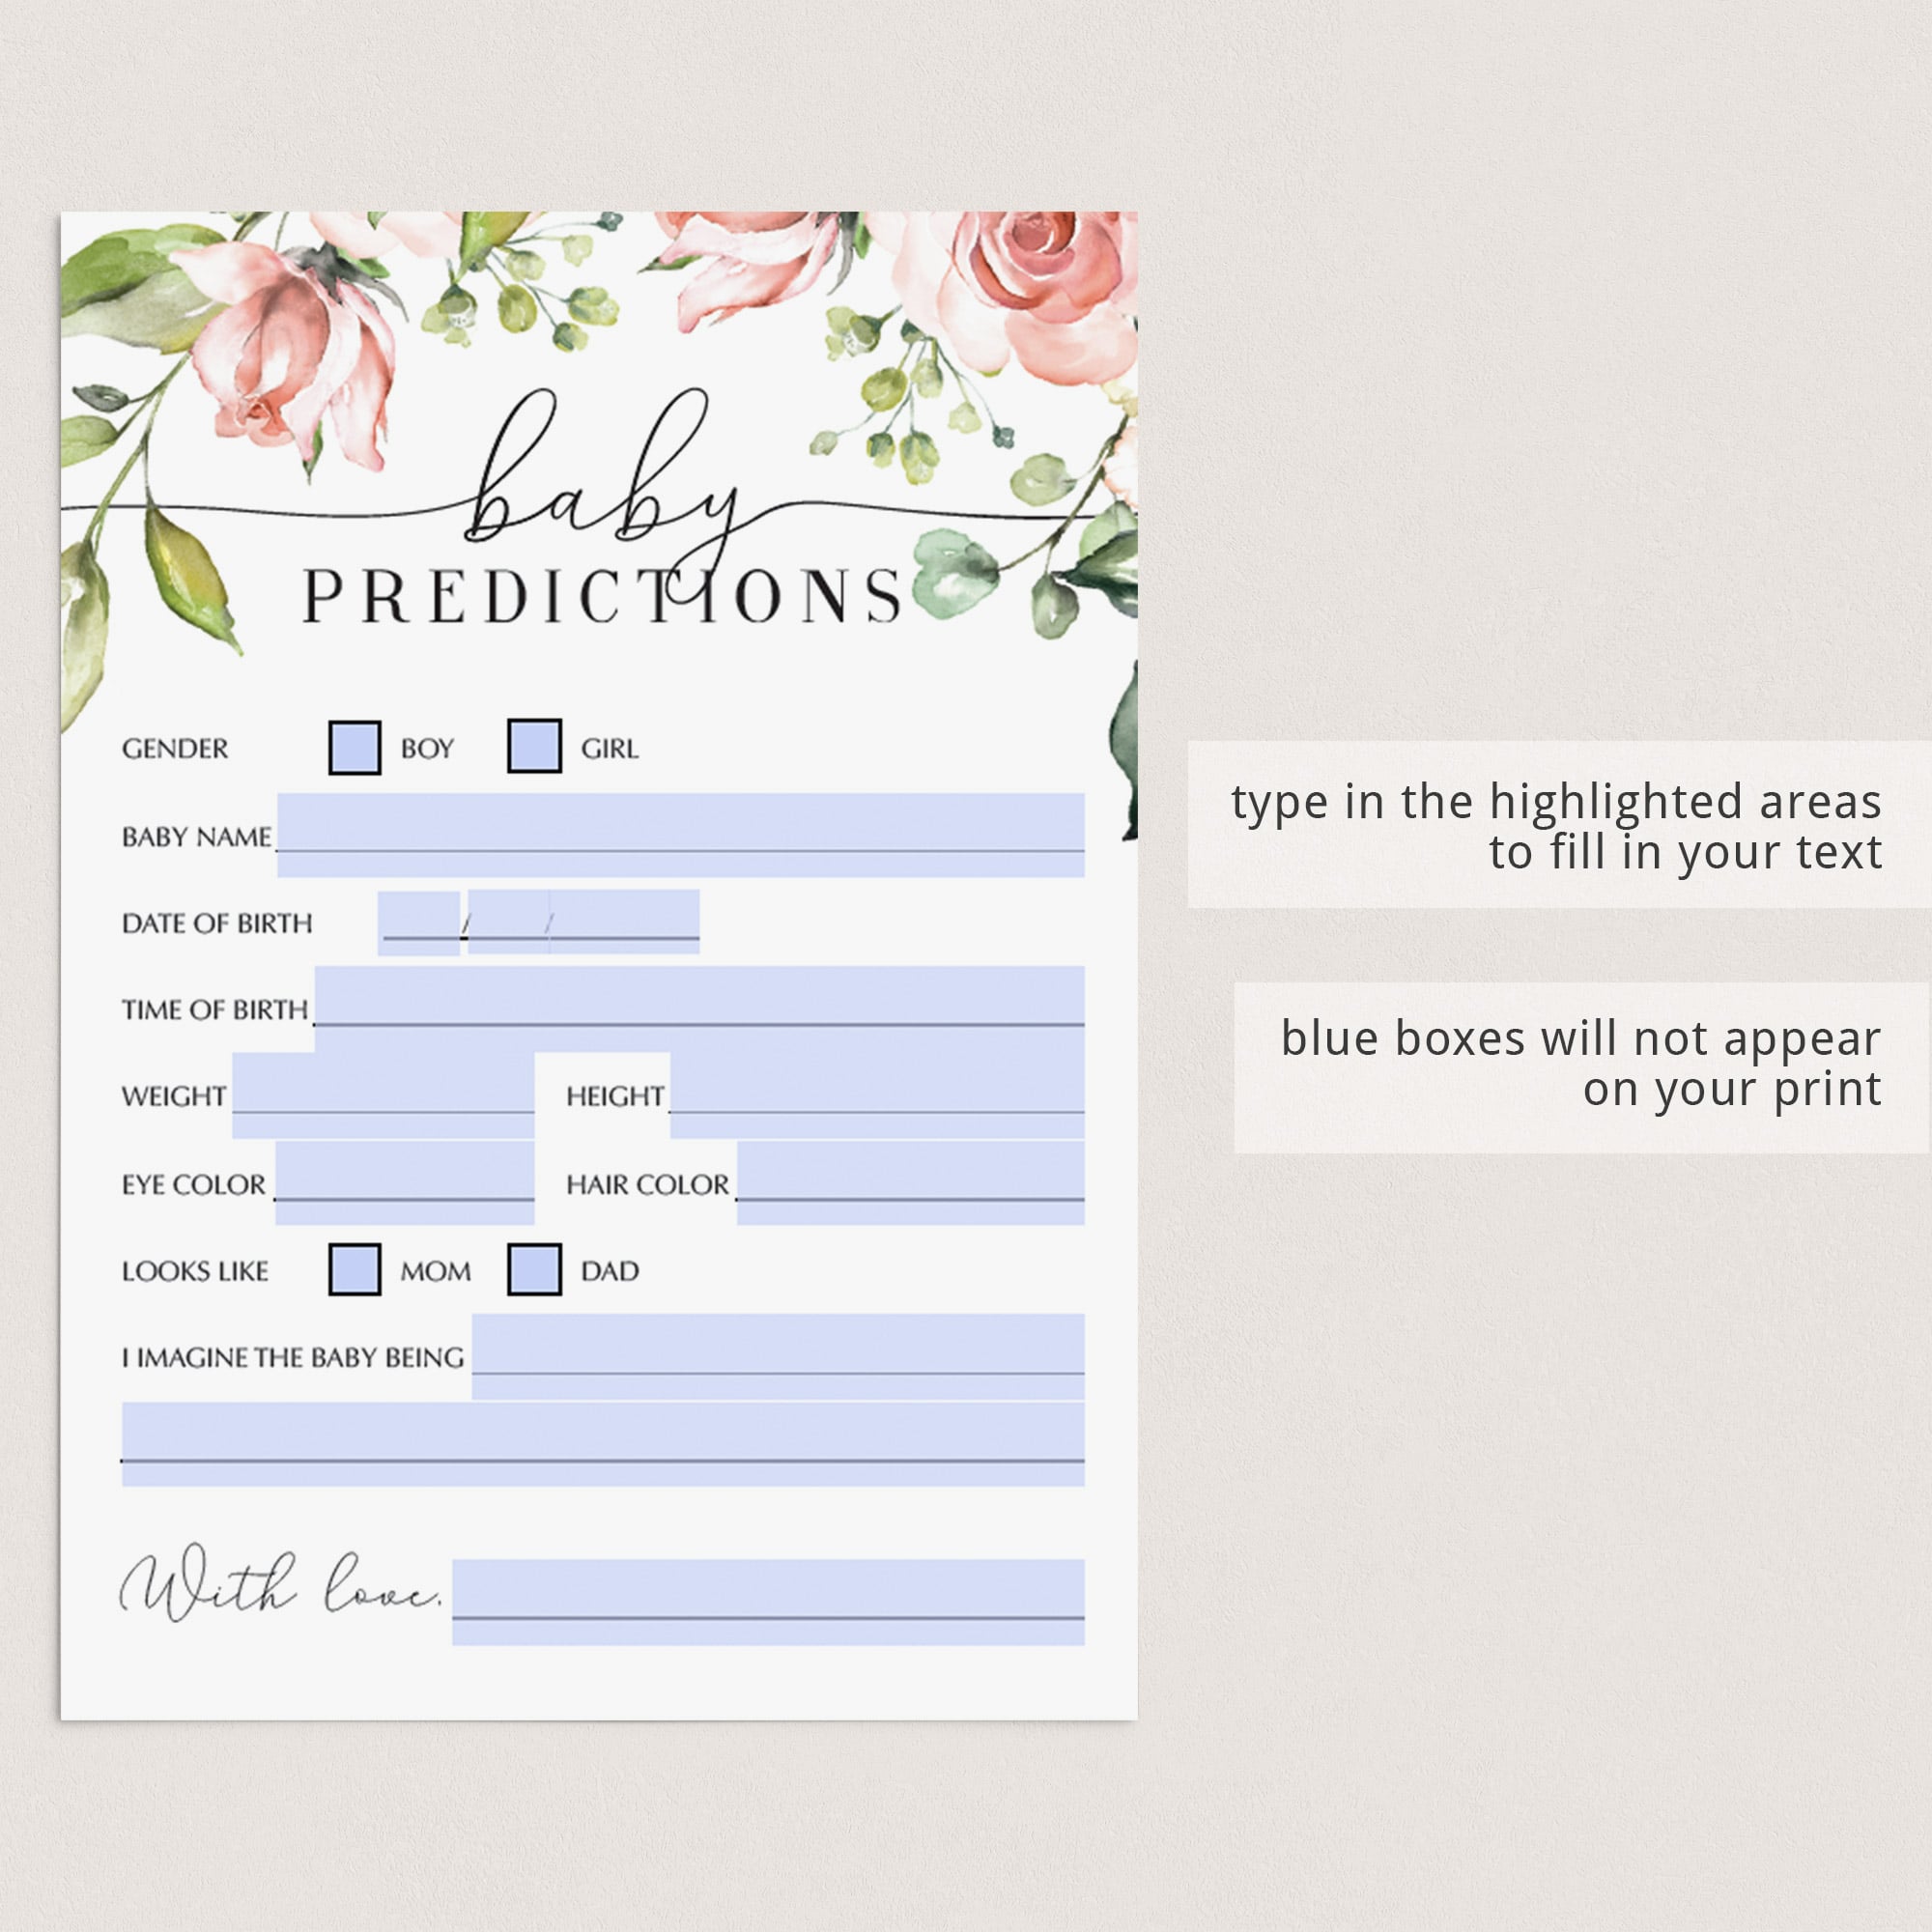 Fillable pdf baby shower prediction cards by LittleSizzle